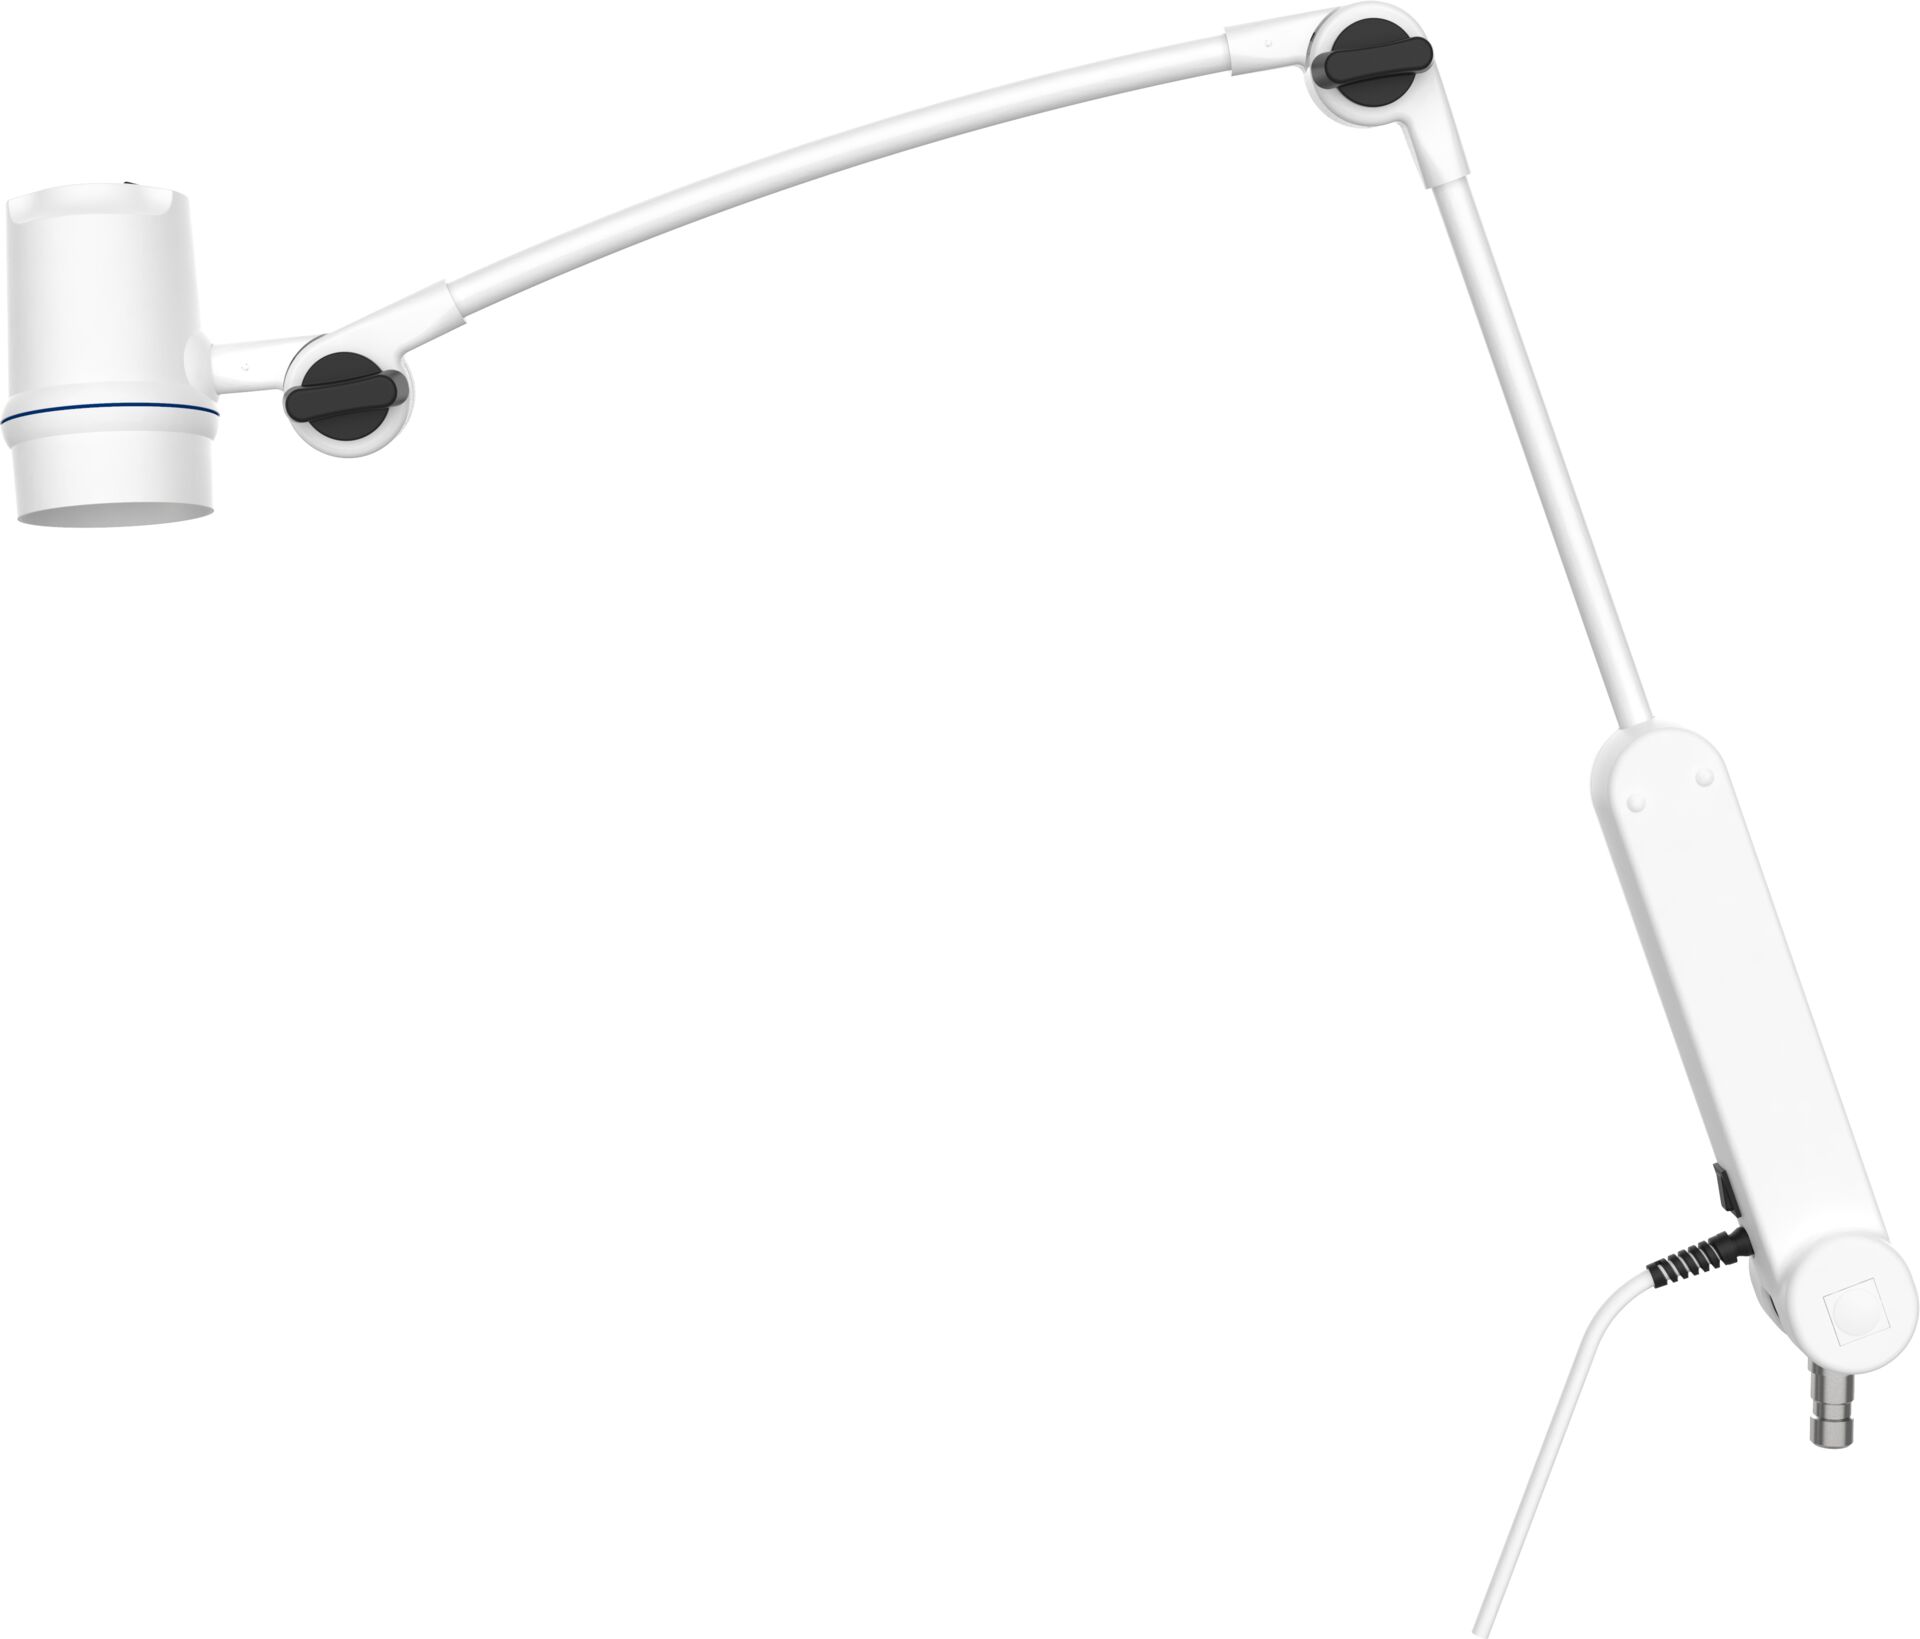 LED - Lamp with double-joint articulated arm